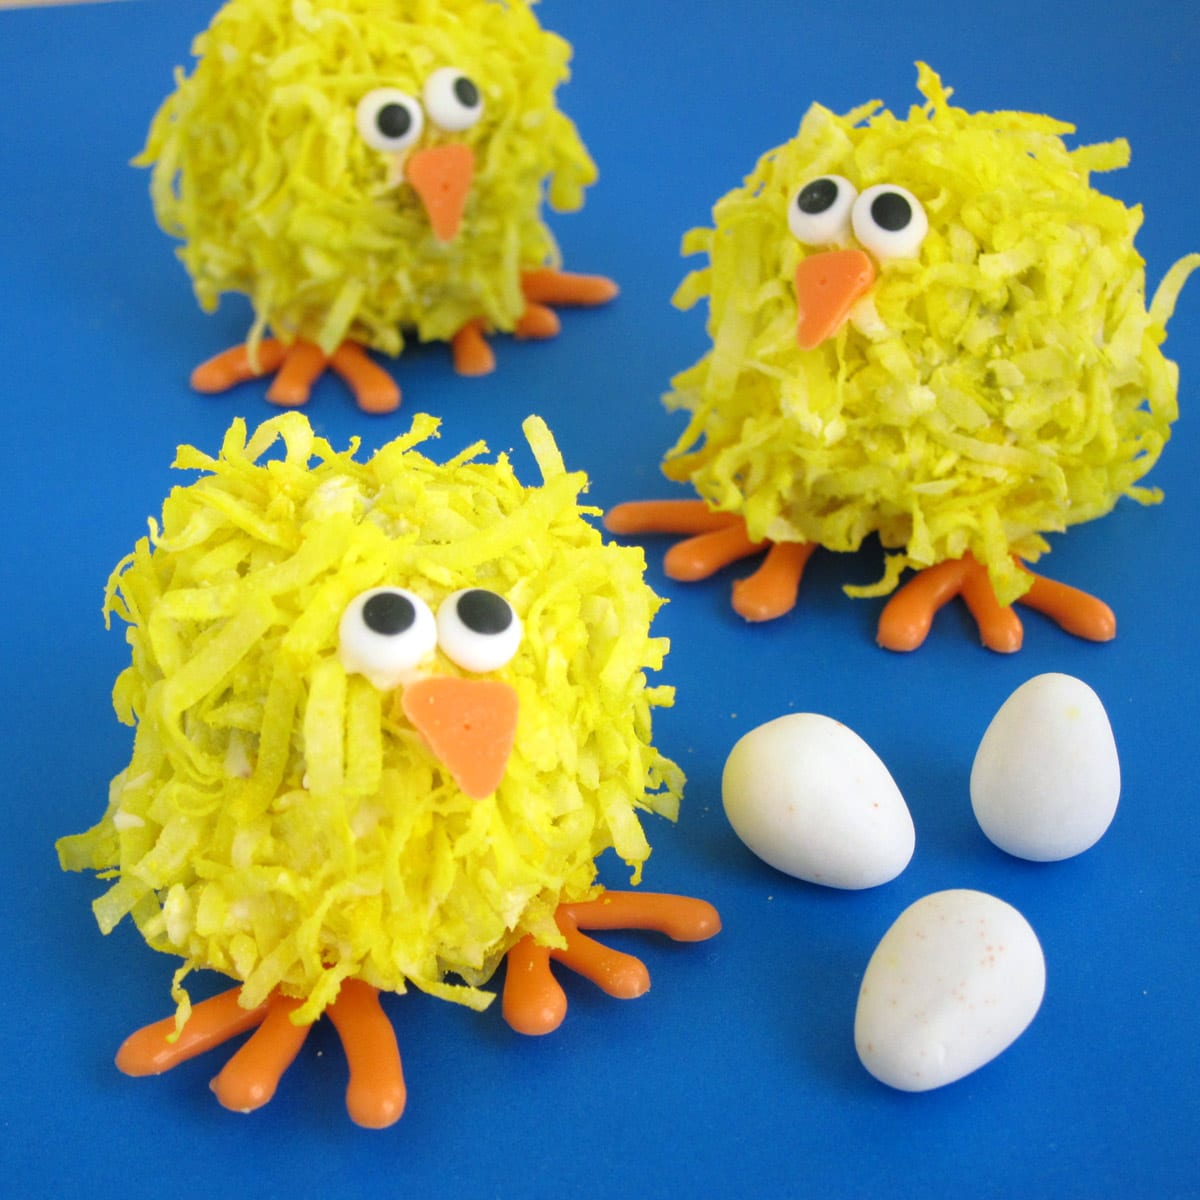 coconut cake ball chicks next to candy eggs on a blue background